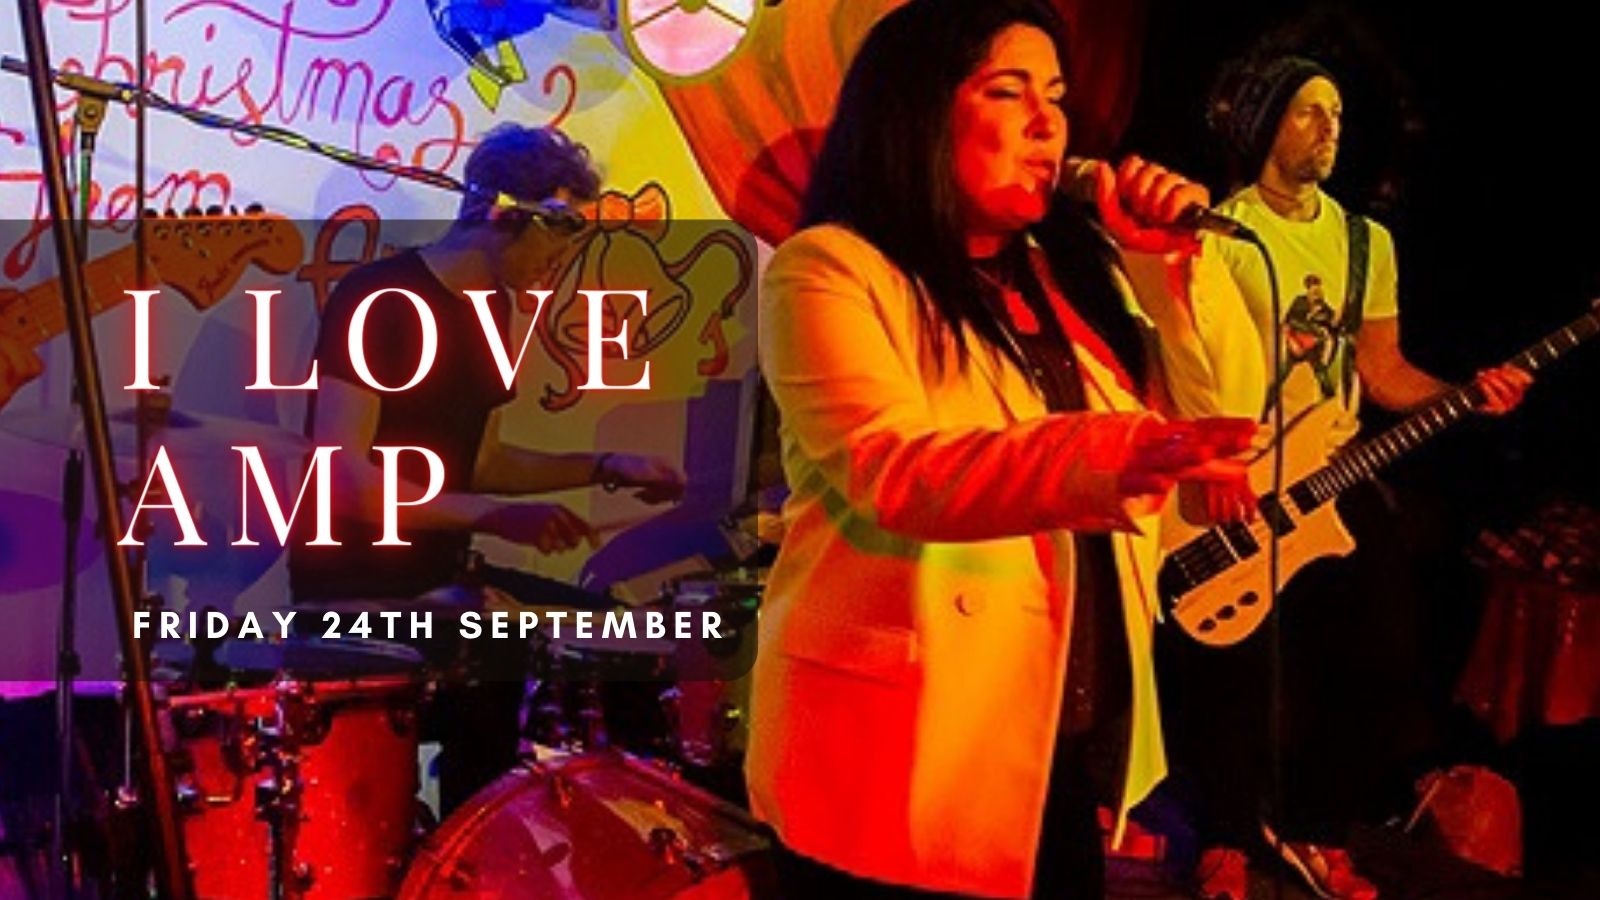 I LOVE AMP | Plymouth, Annabel’s Cabaret & Discotheque